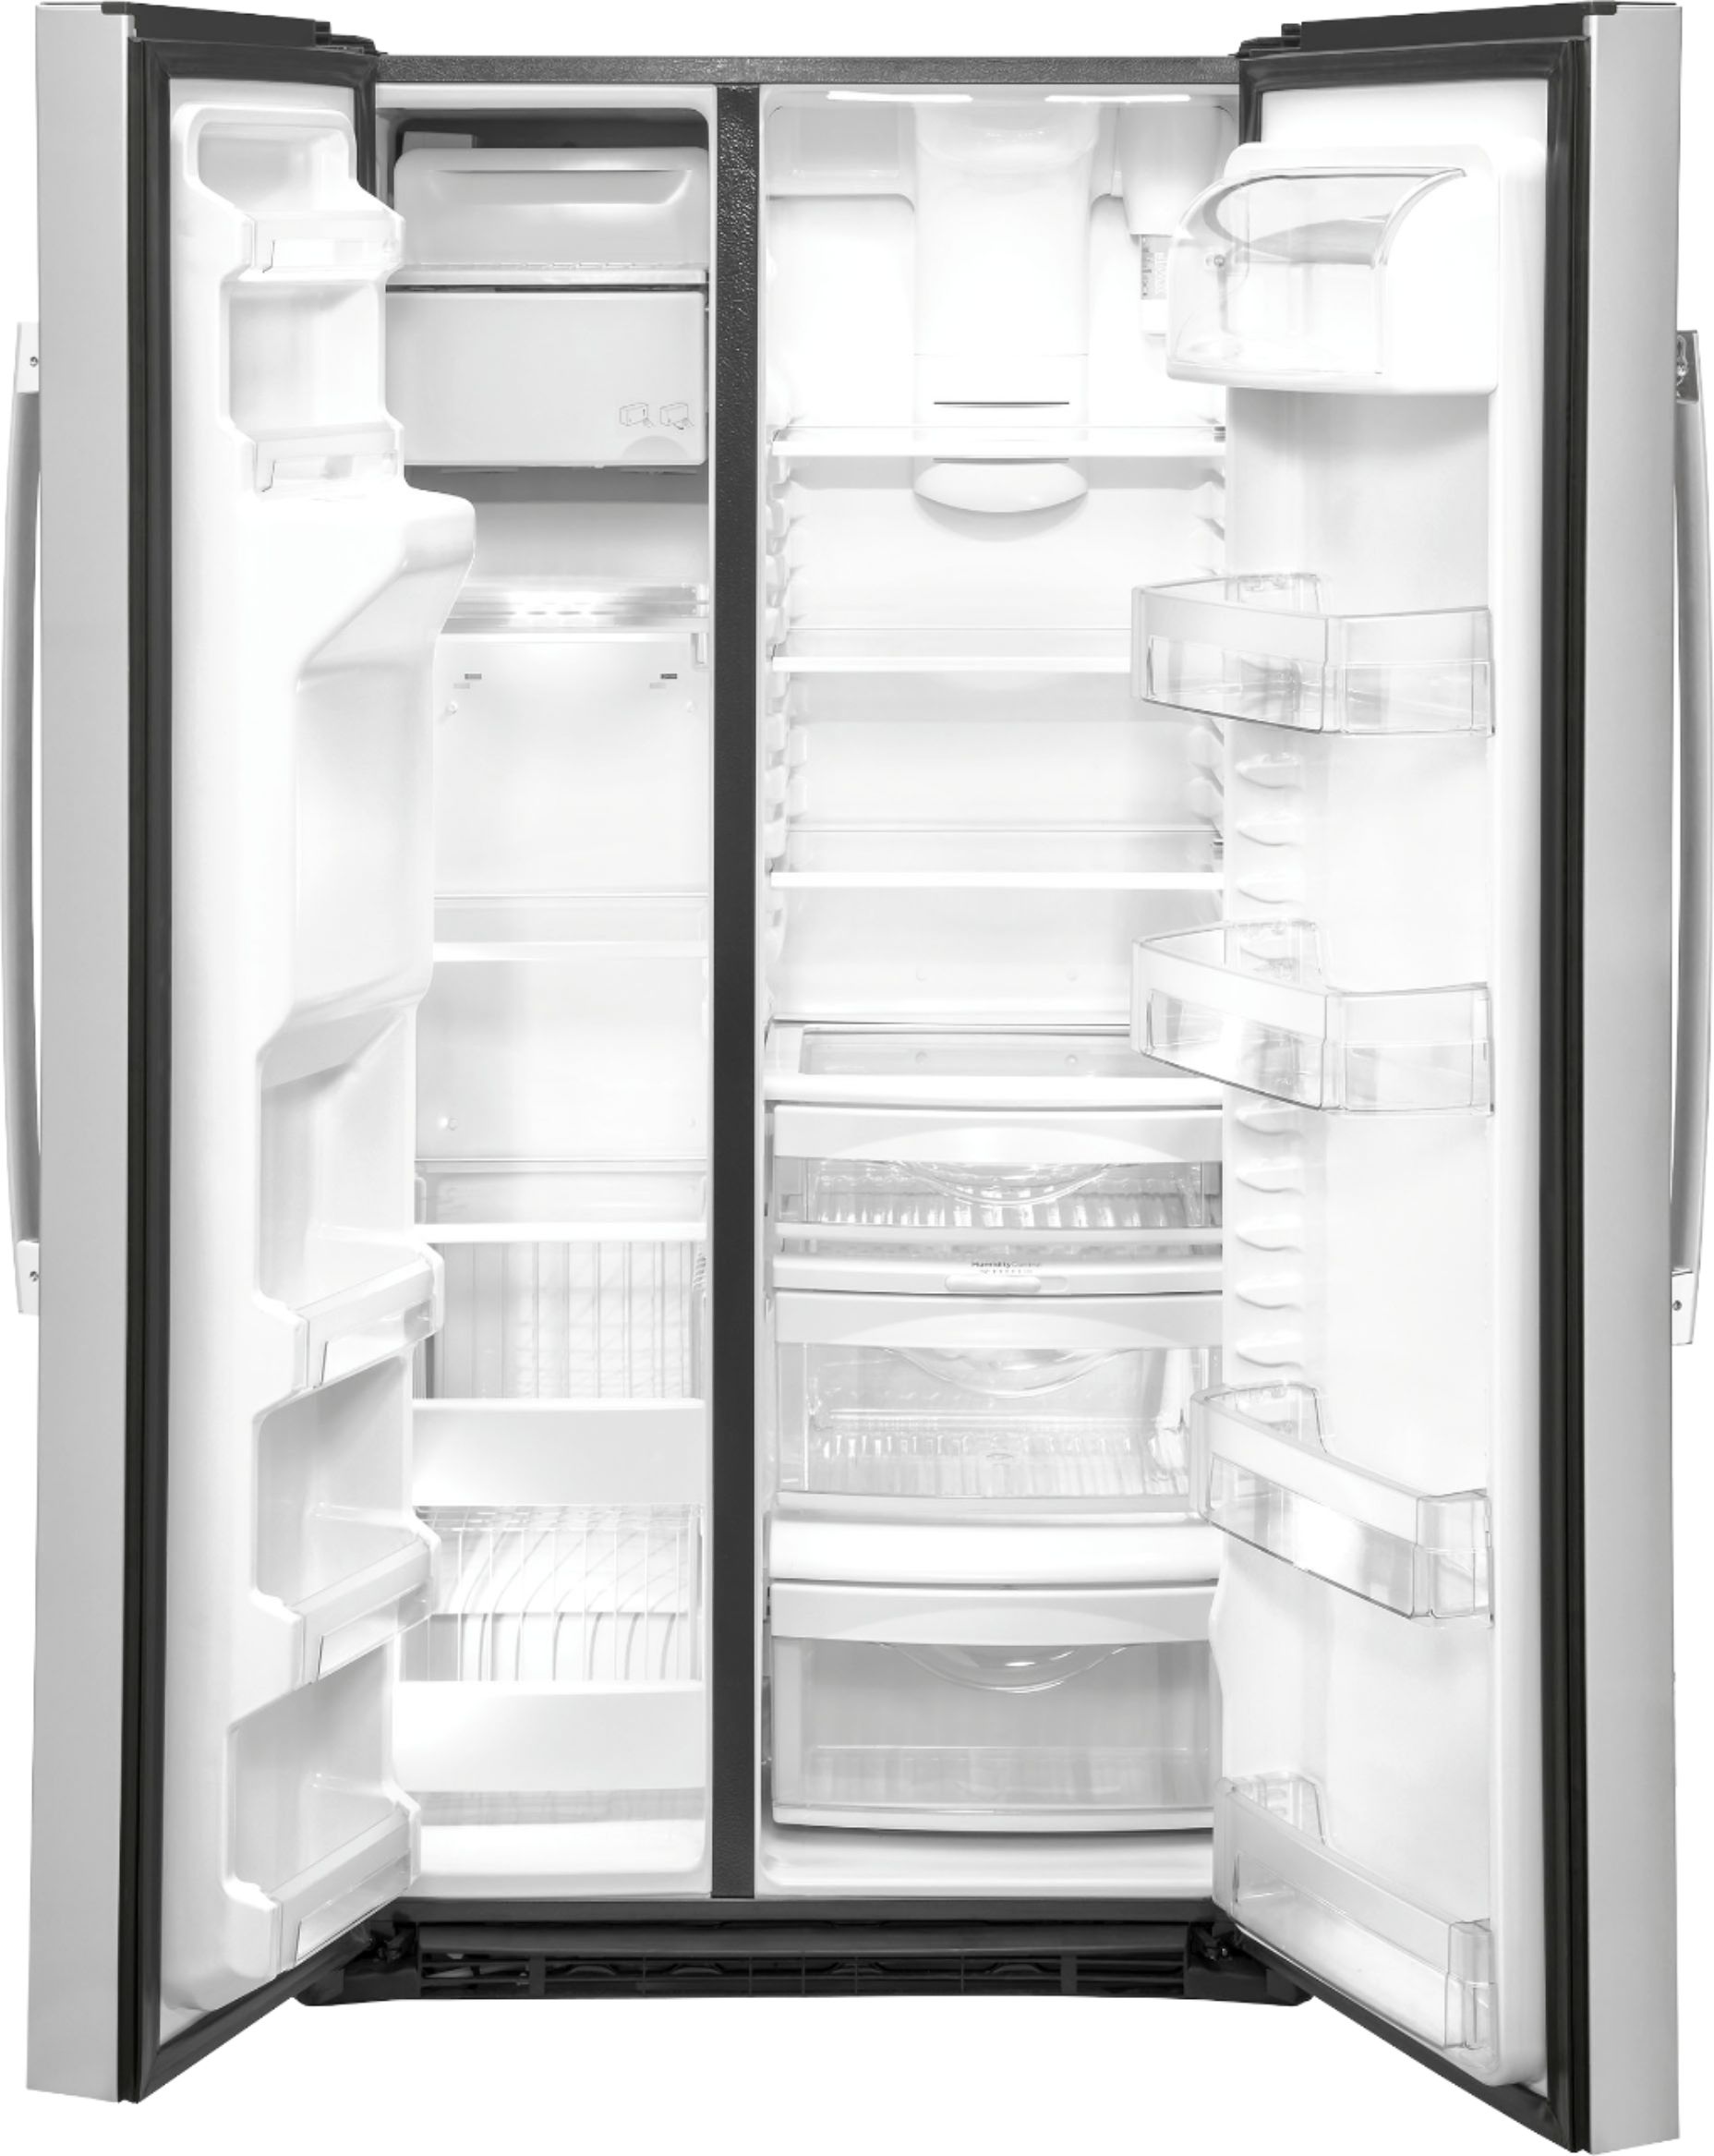 Left View: Café - 29.6 Cu. Ft. Side-by-Side Built-In Refrigerator - Stainless steel